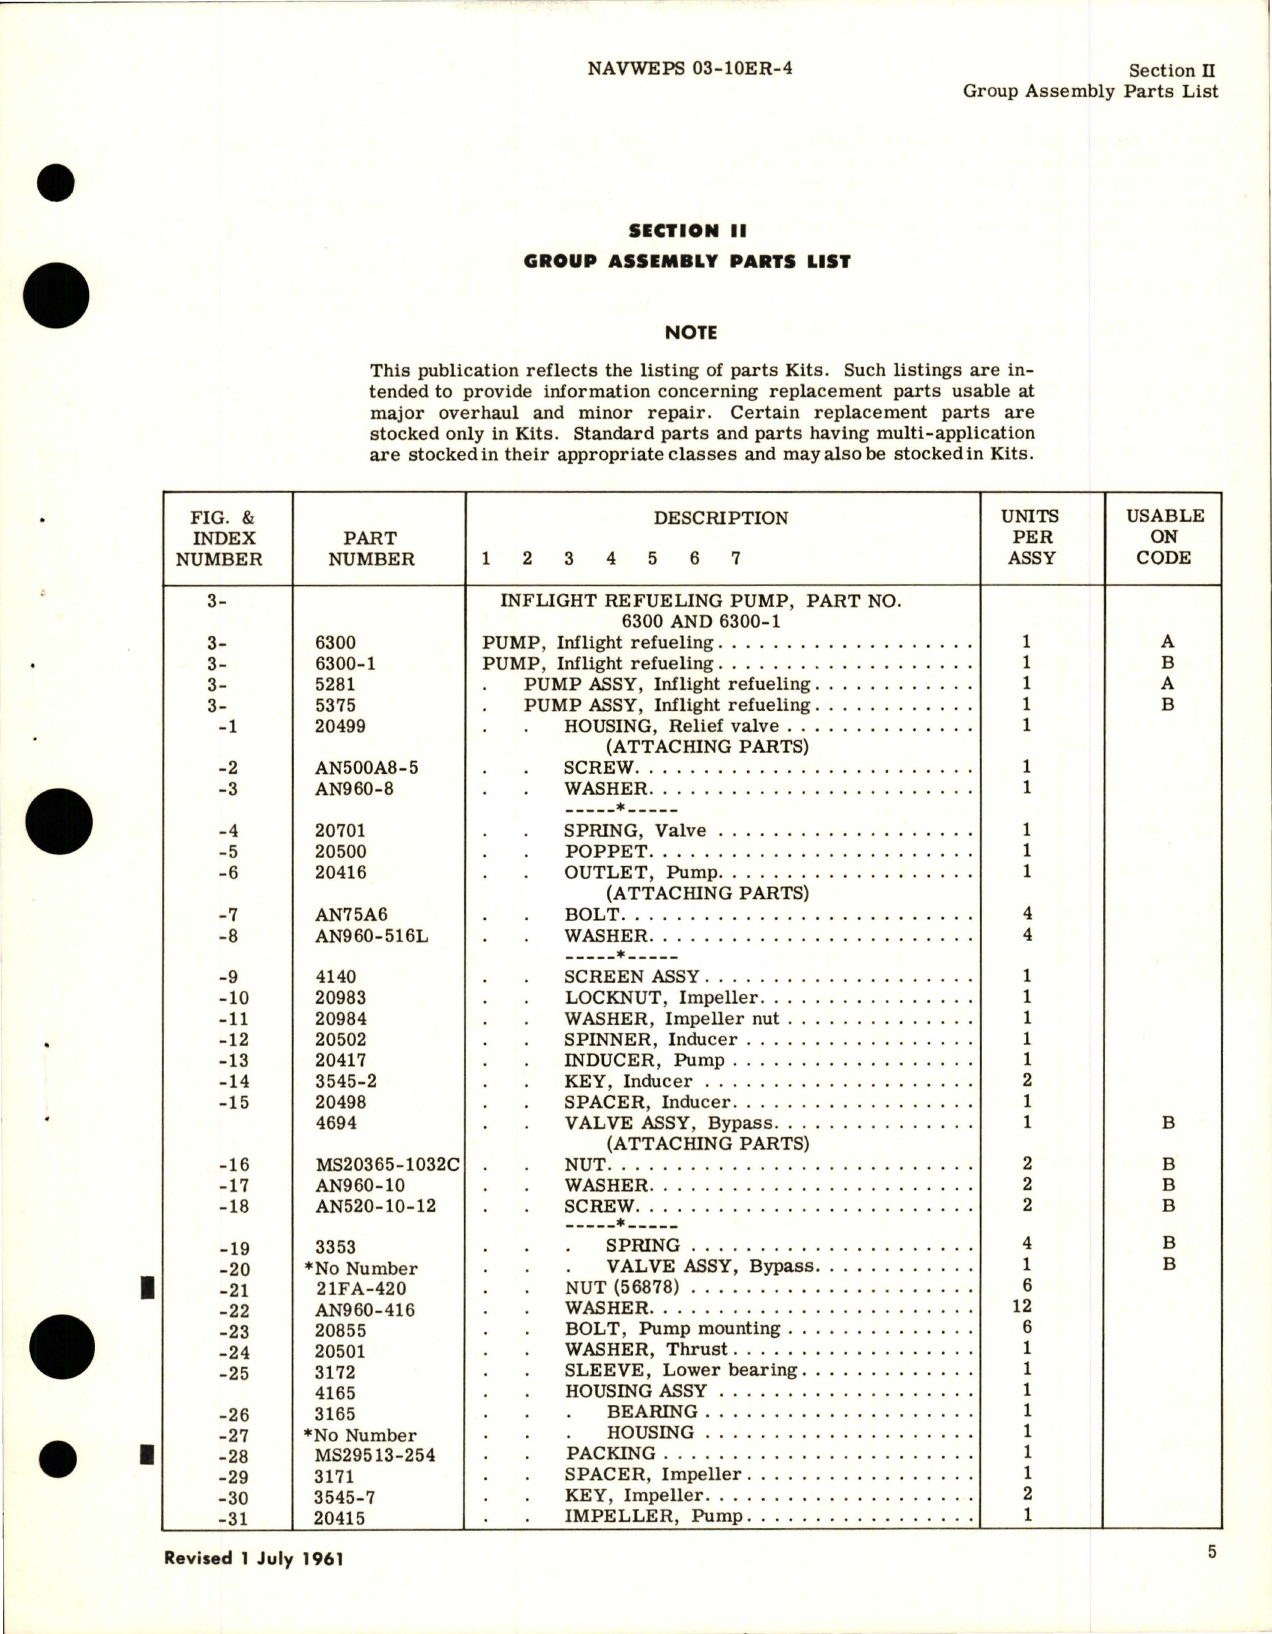 Sample page 5 from AirCorps Library document: Illustrated Parts Breakdown for Inflight Refueling Pump - Part 6300, 6300-1